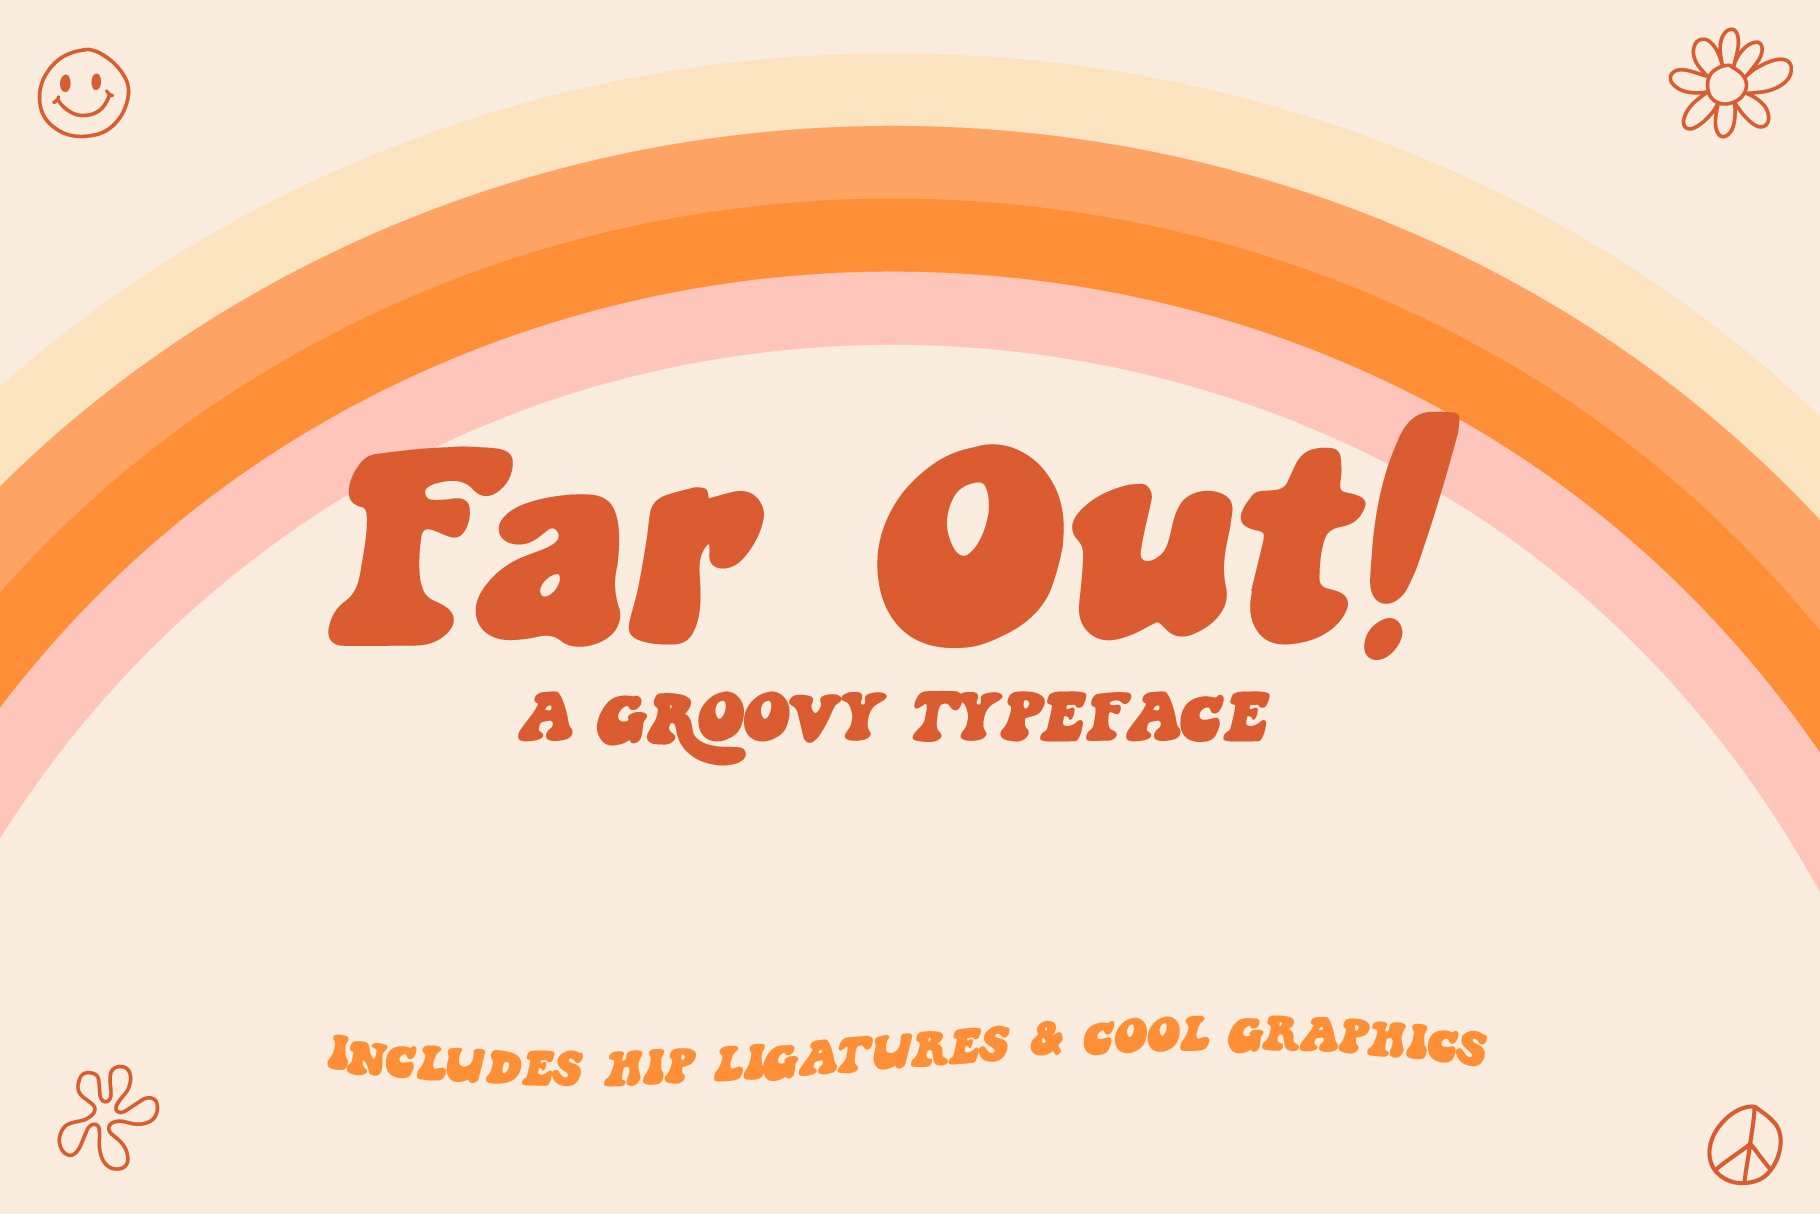 Far Out! - A Groovy Typeface cover image.